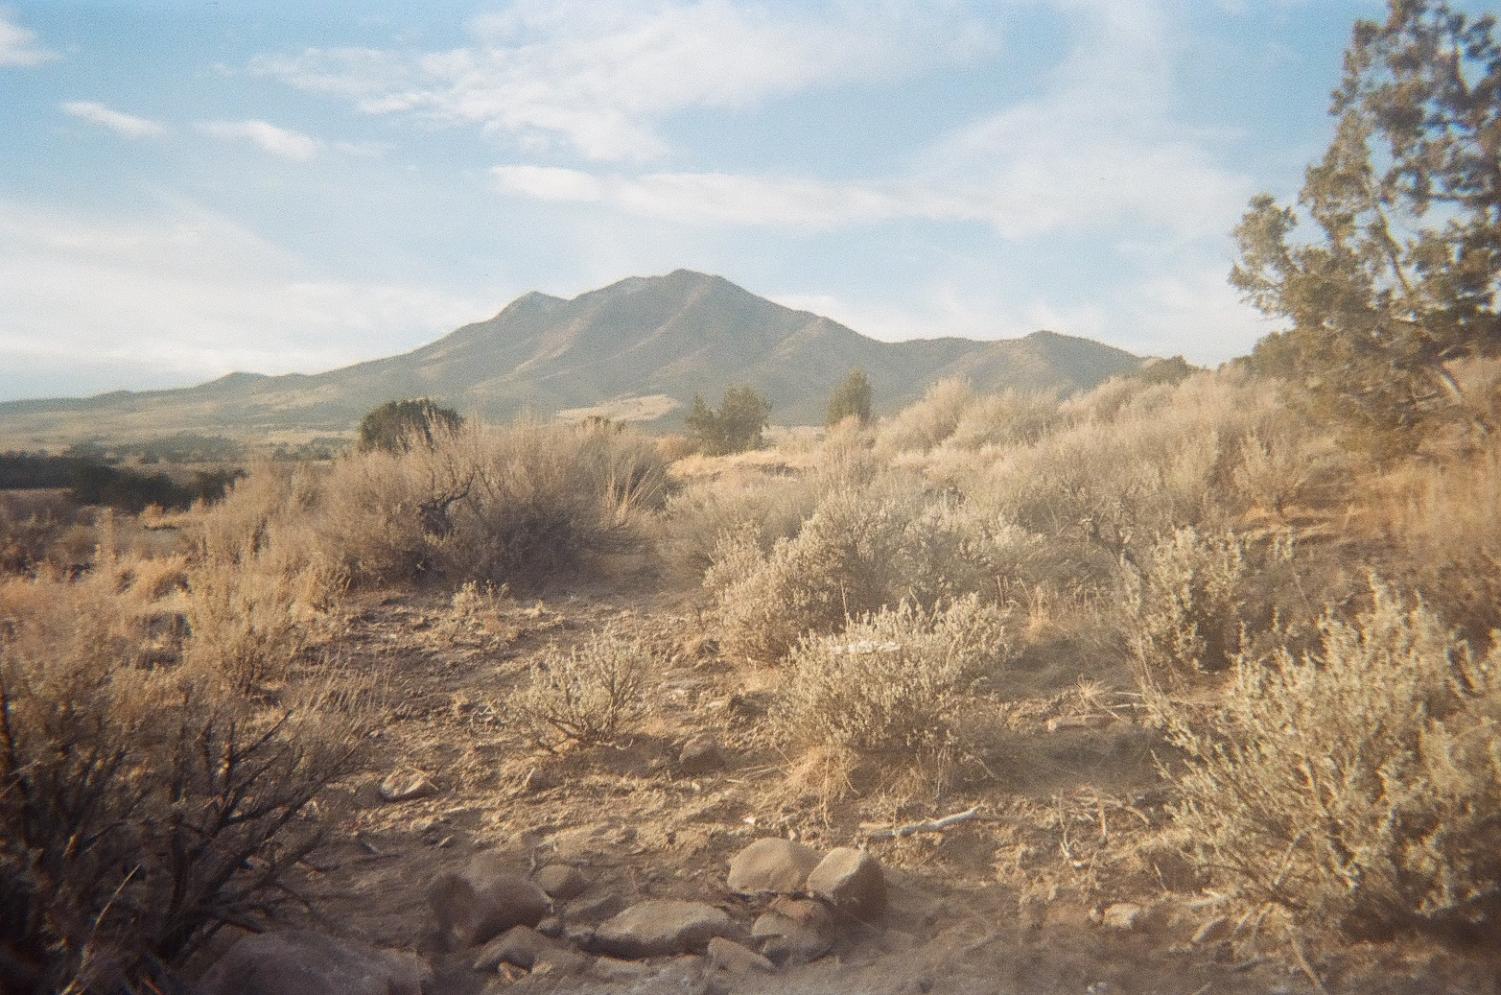 Film photo of a mountain in the distance. In the foreground stand dry plants.